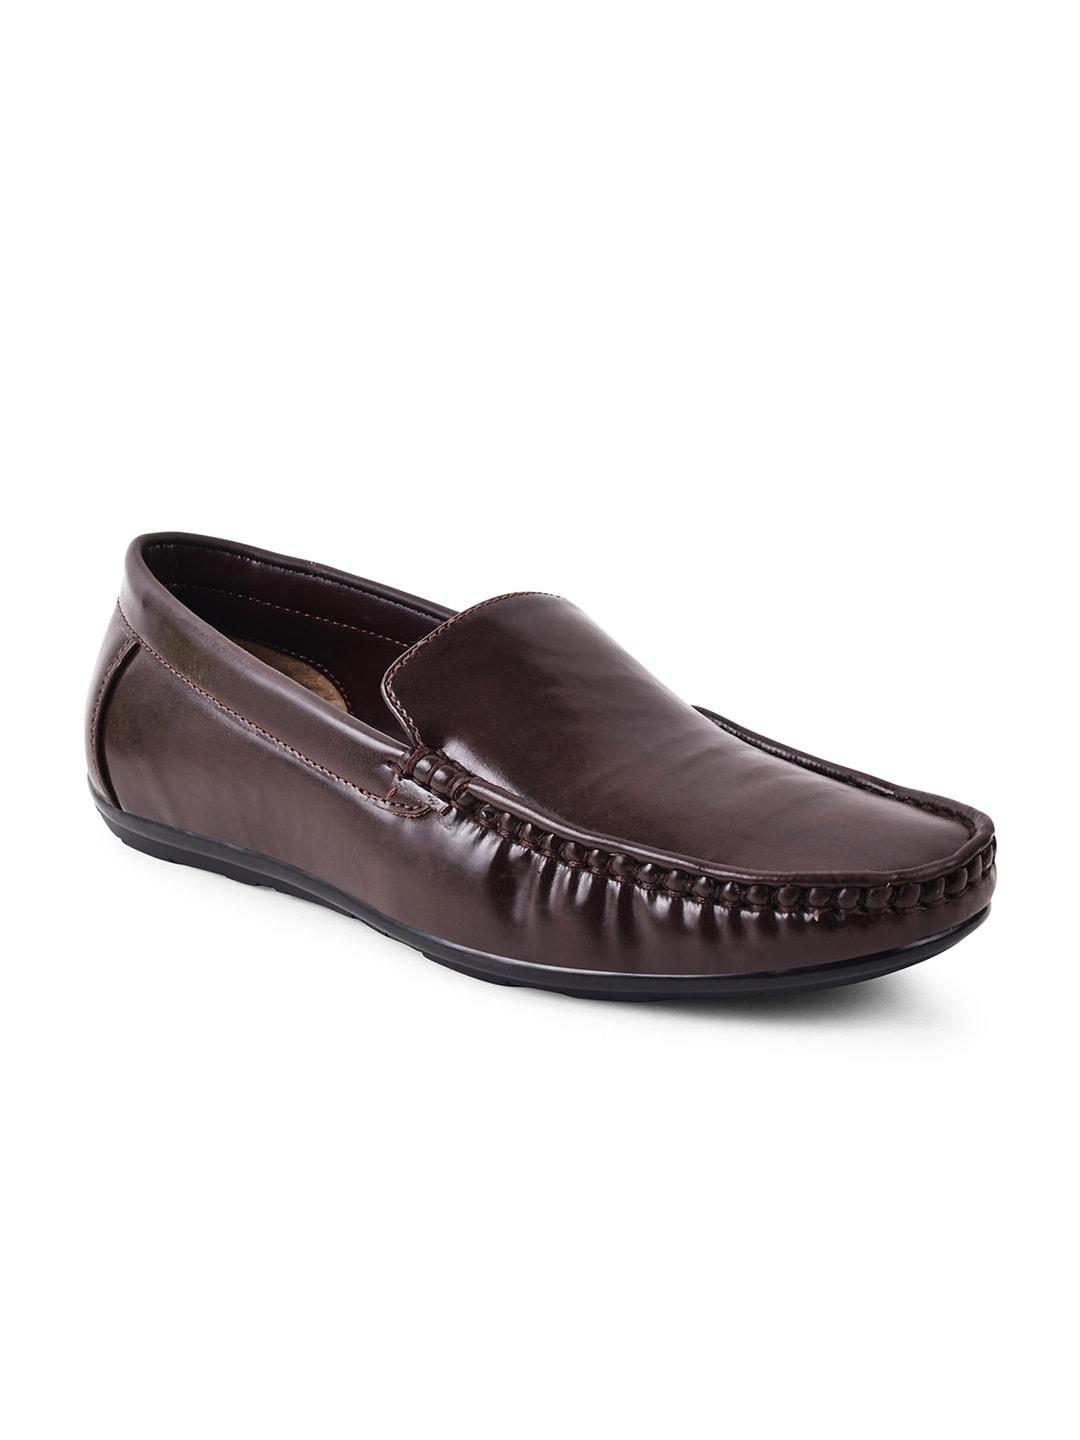 paragon-men-square--toe-formal-loafers